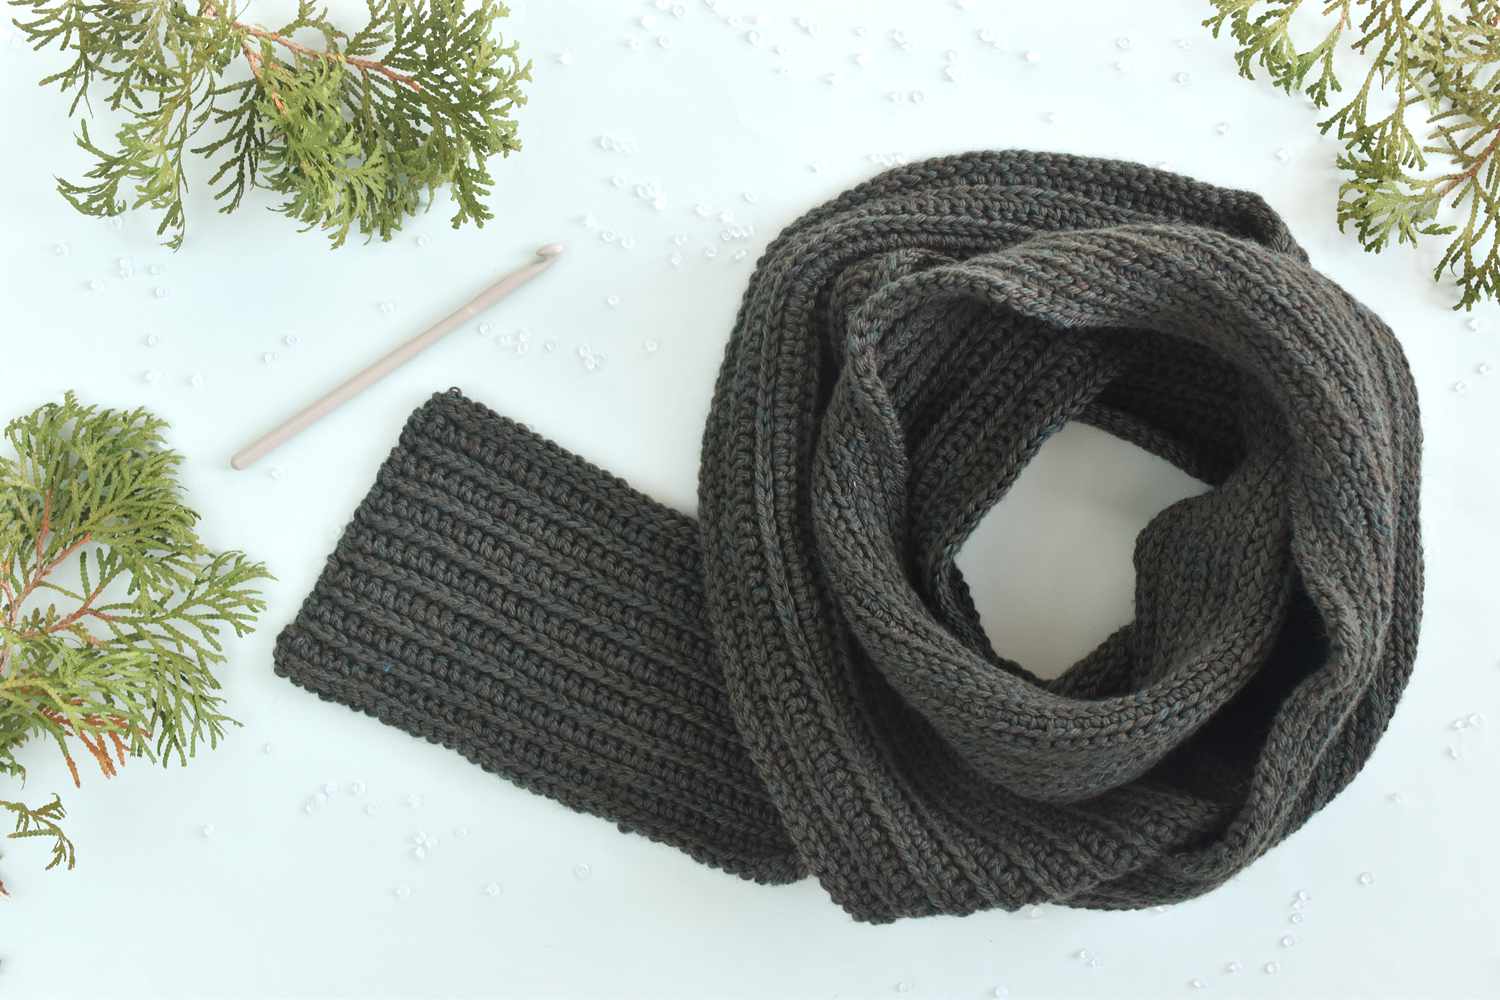 How to Crochet a Men's Scarf